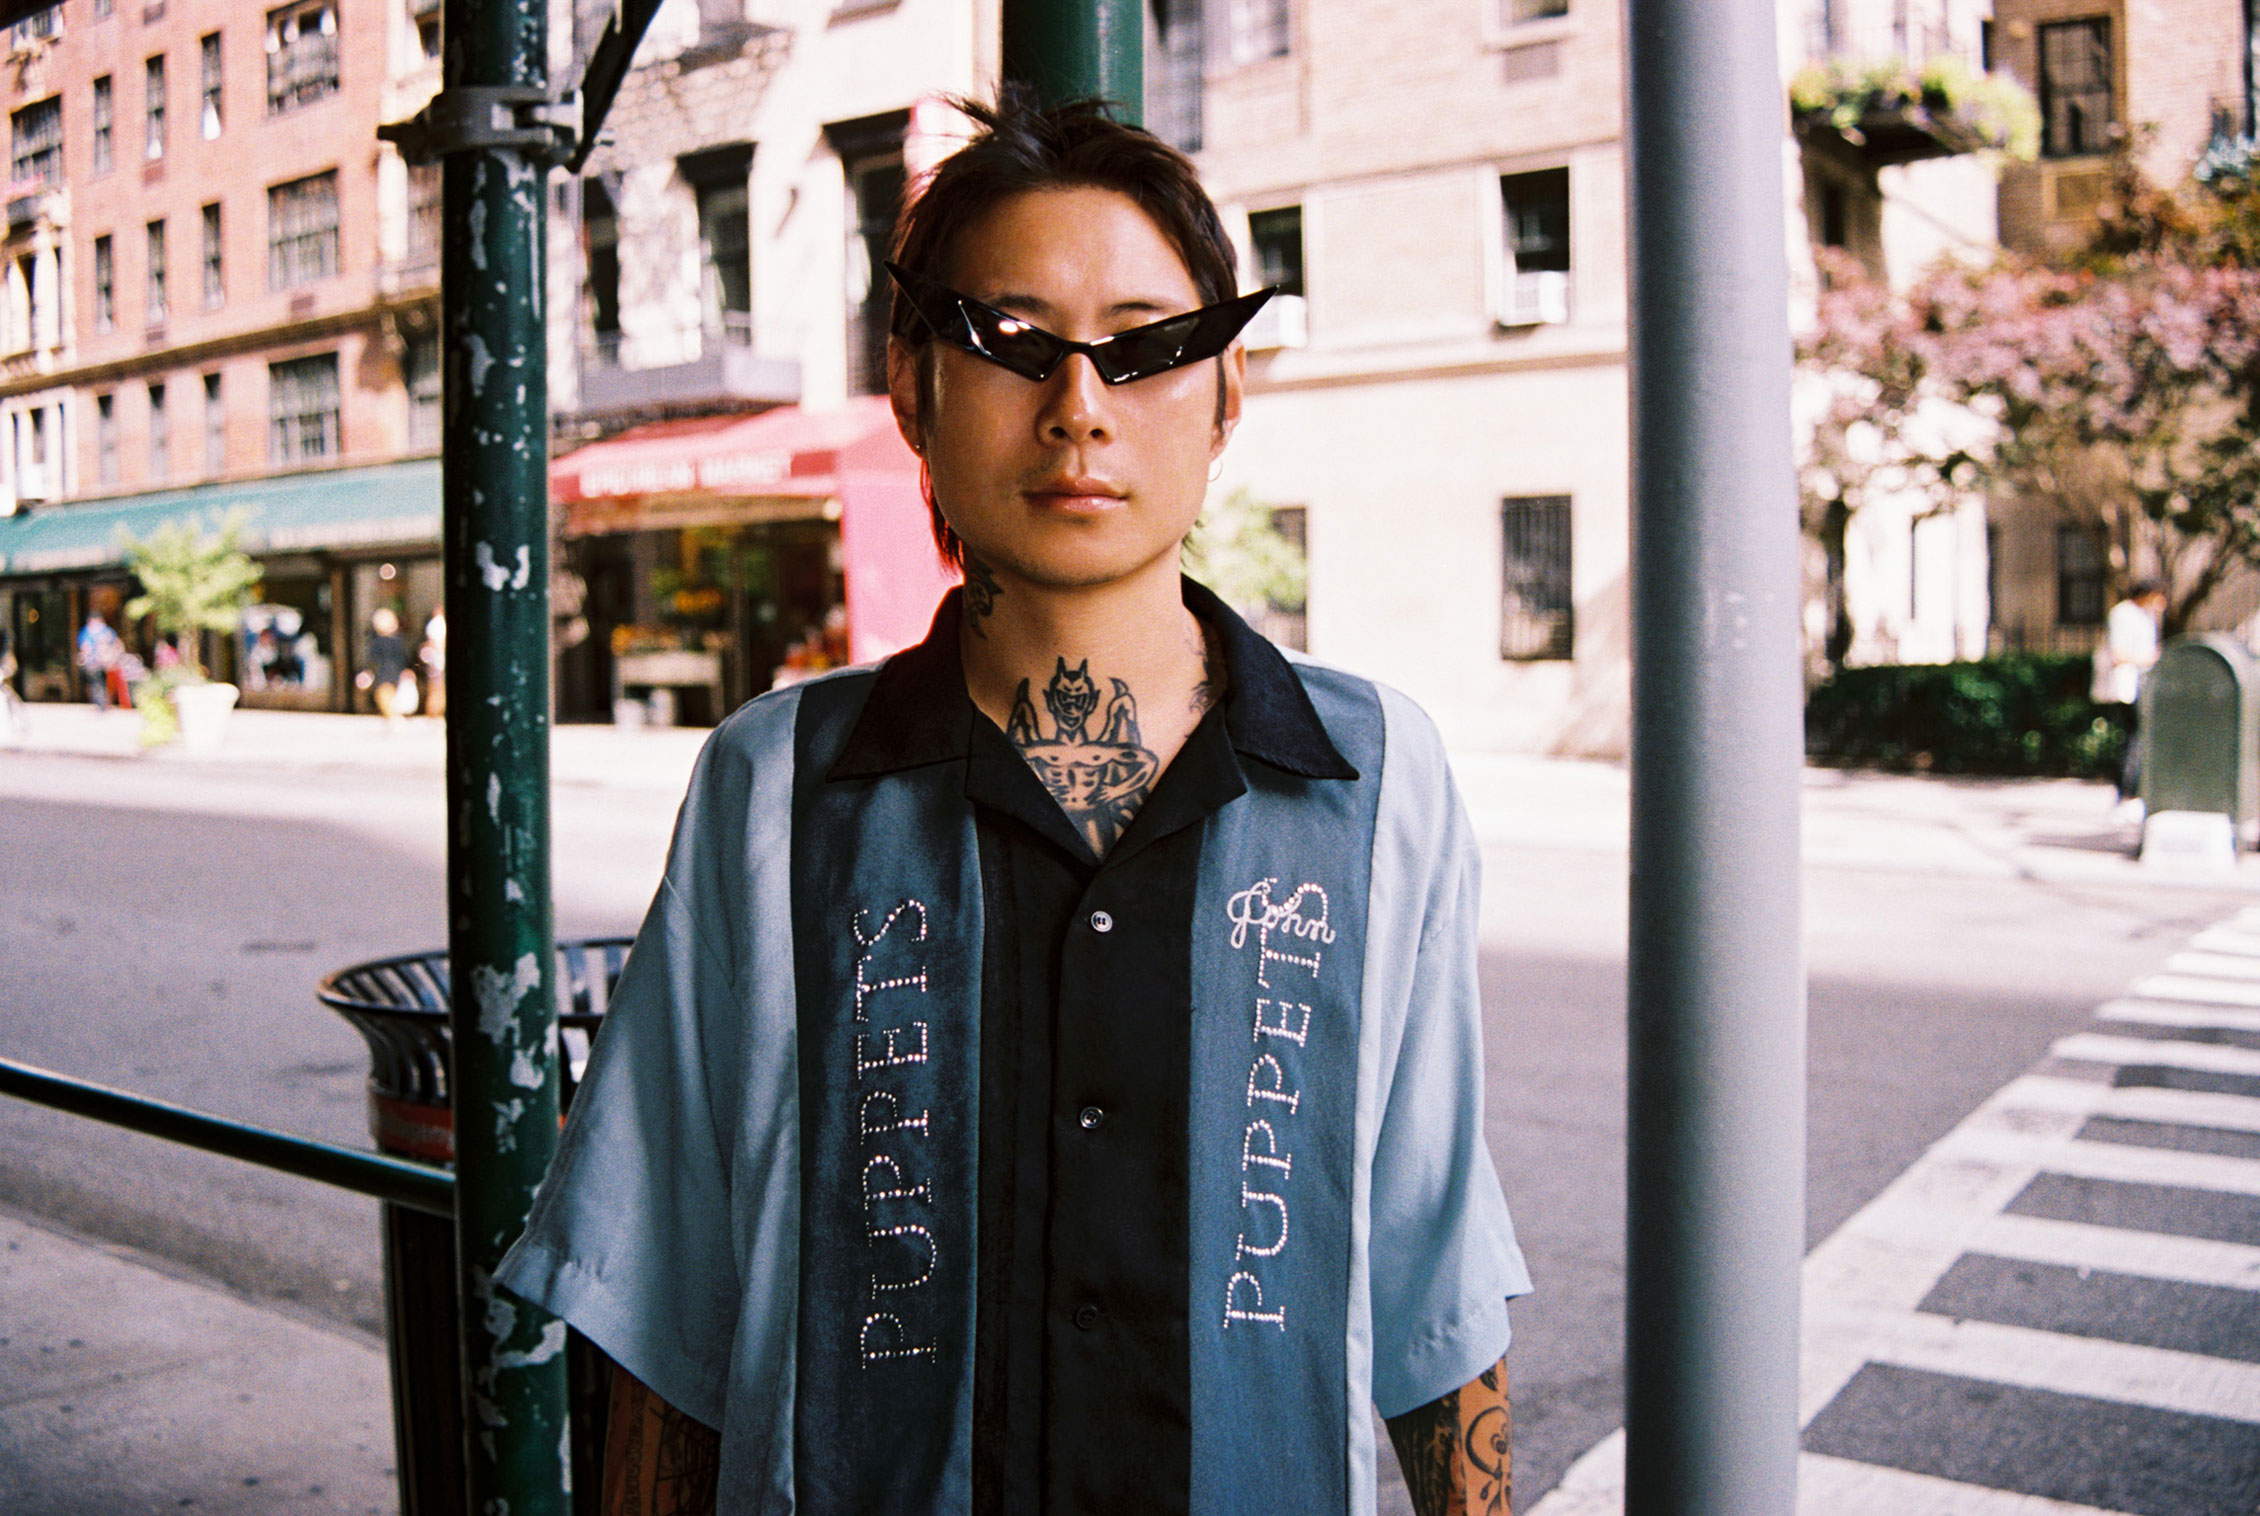 Danny Bowien in Puppets and Puppets SS20. Photo by Richie Shazam. Courtesy of Puppets and Puppets.